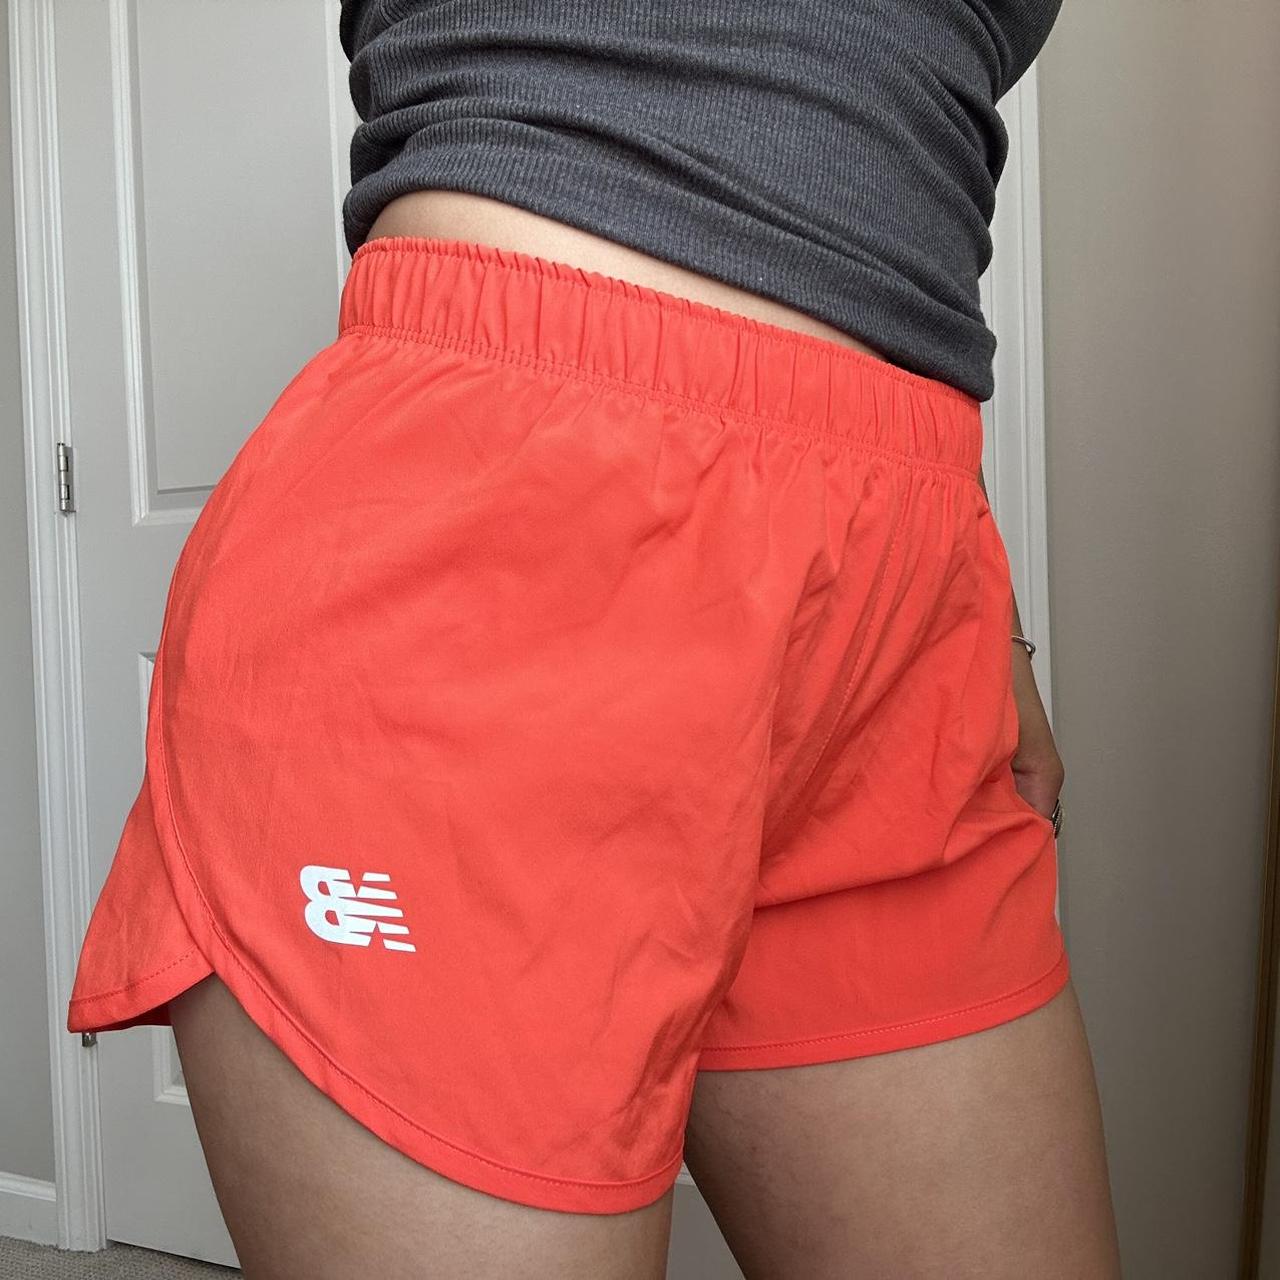 no tag, red new balance shorts, built in underwear